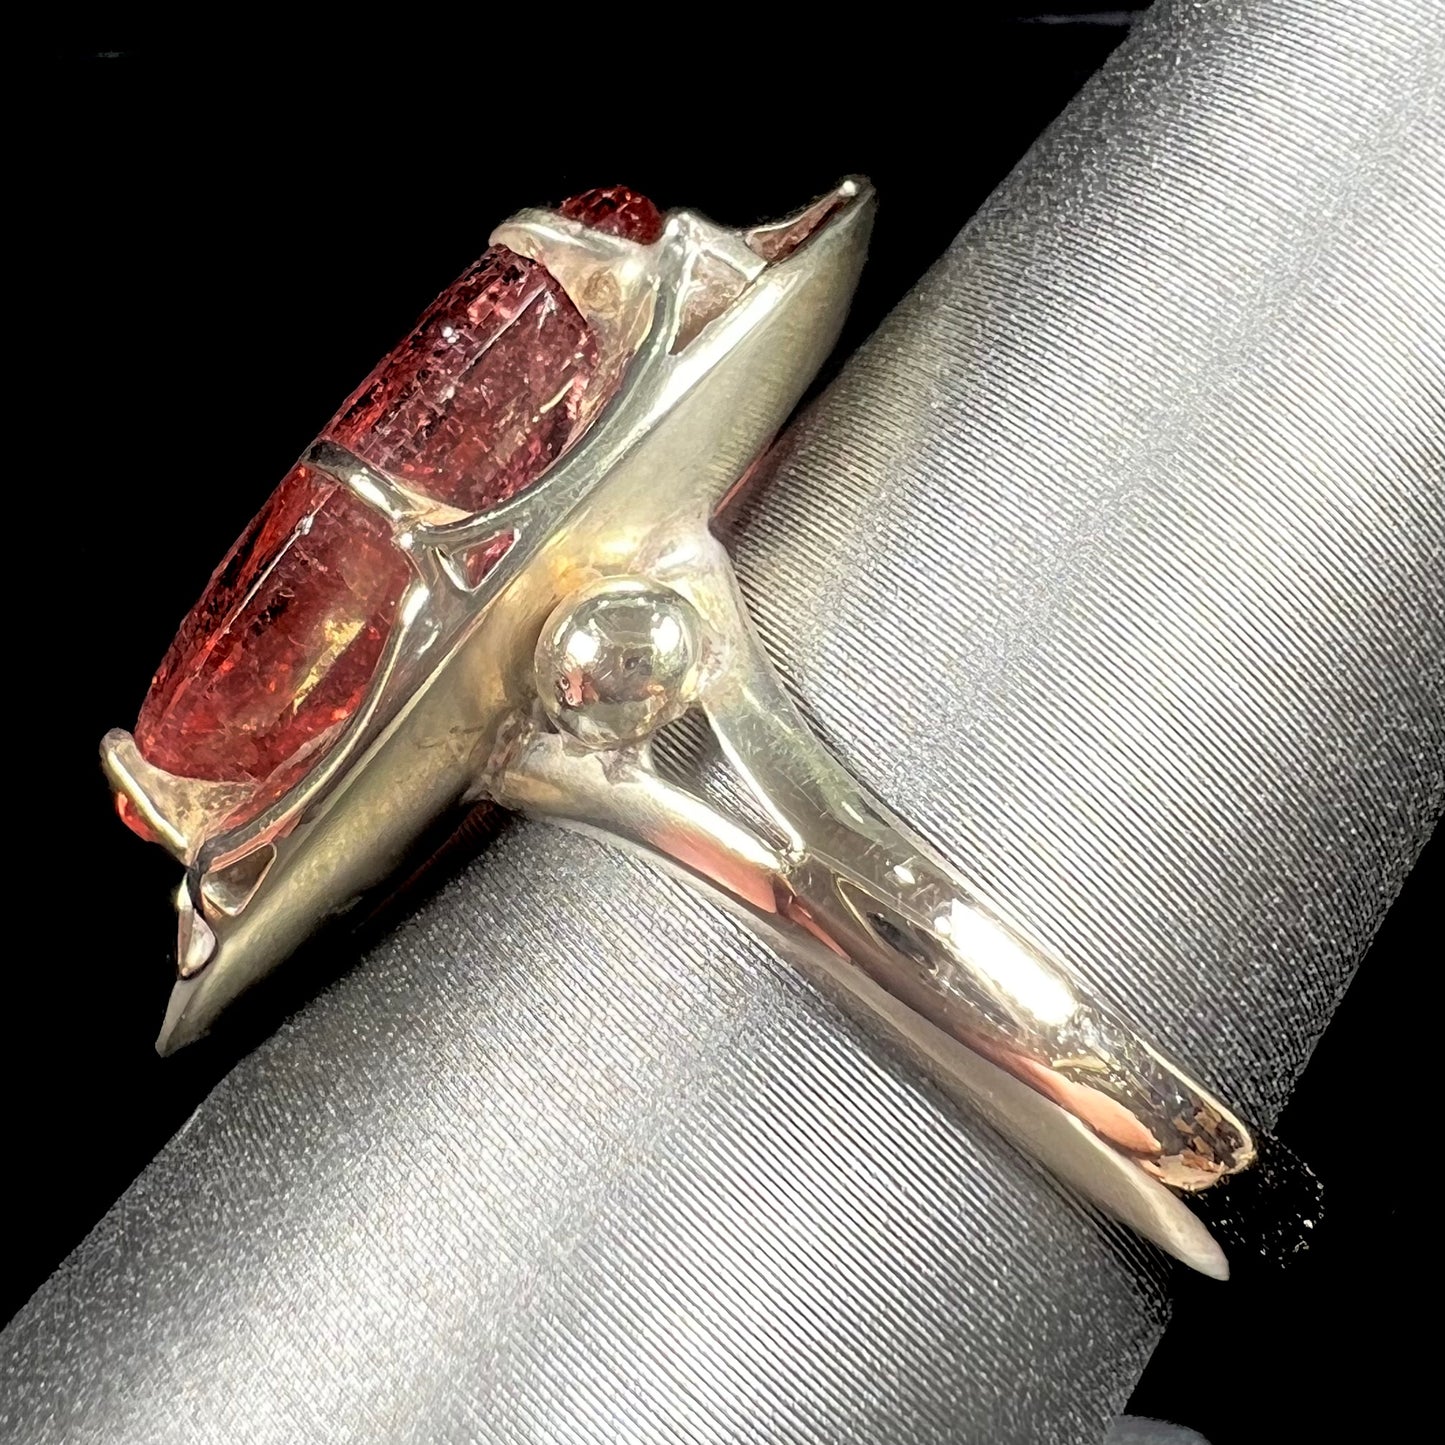 A yellow gold solitaire ring set with an oval cut, rootbeer colored tourmaline stone.